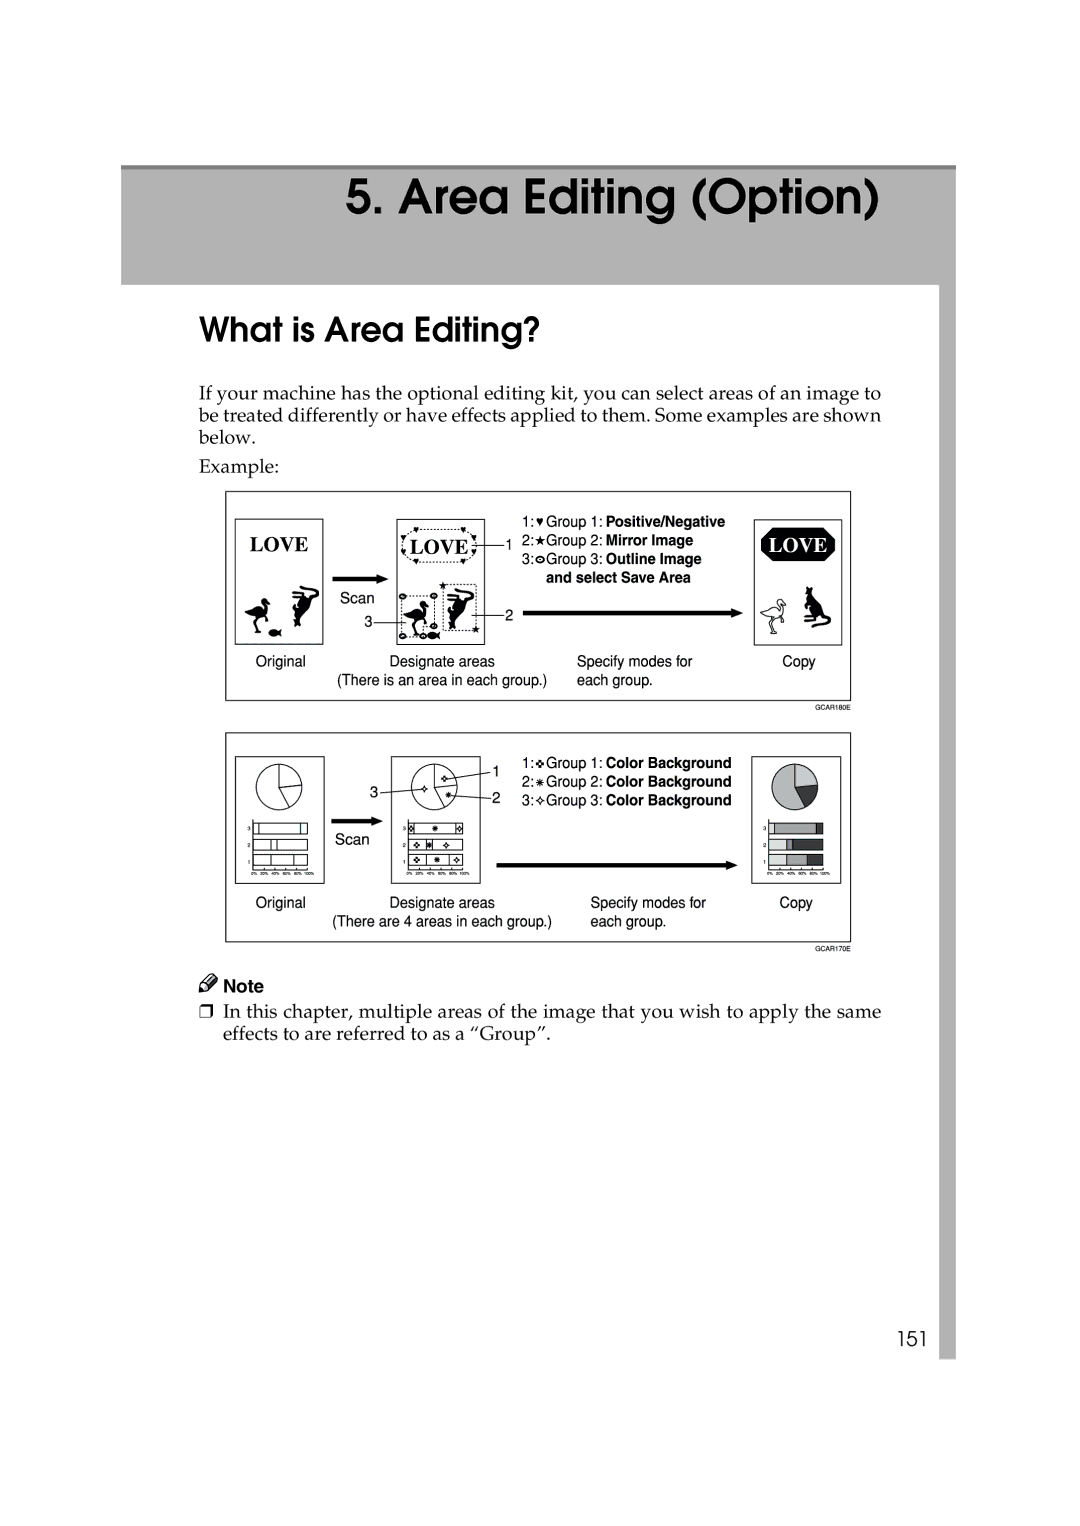 Ricoh 6513 manual What is Area Editing?, 151 